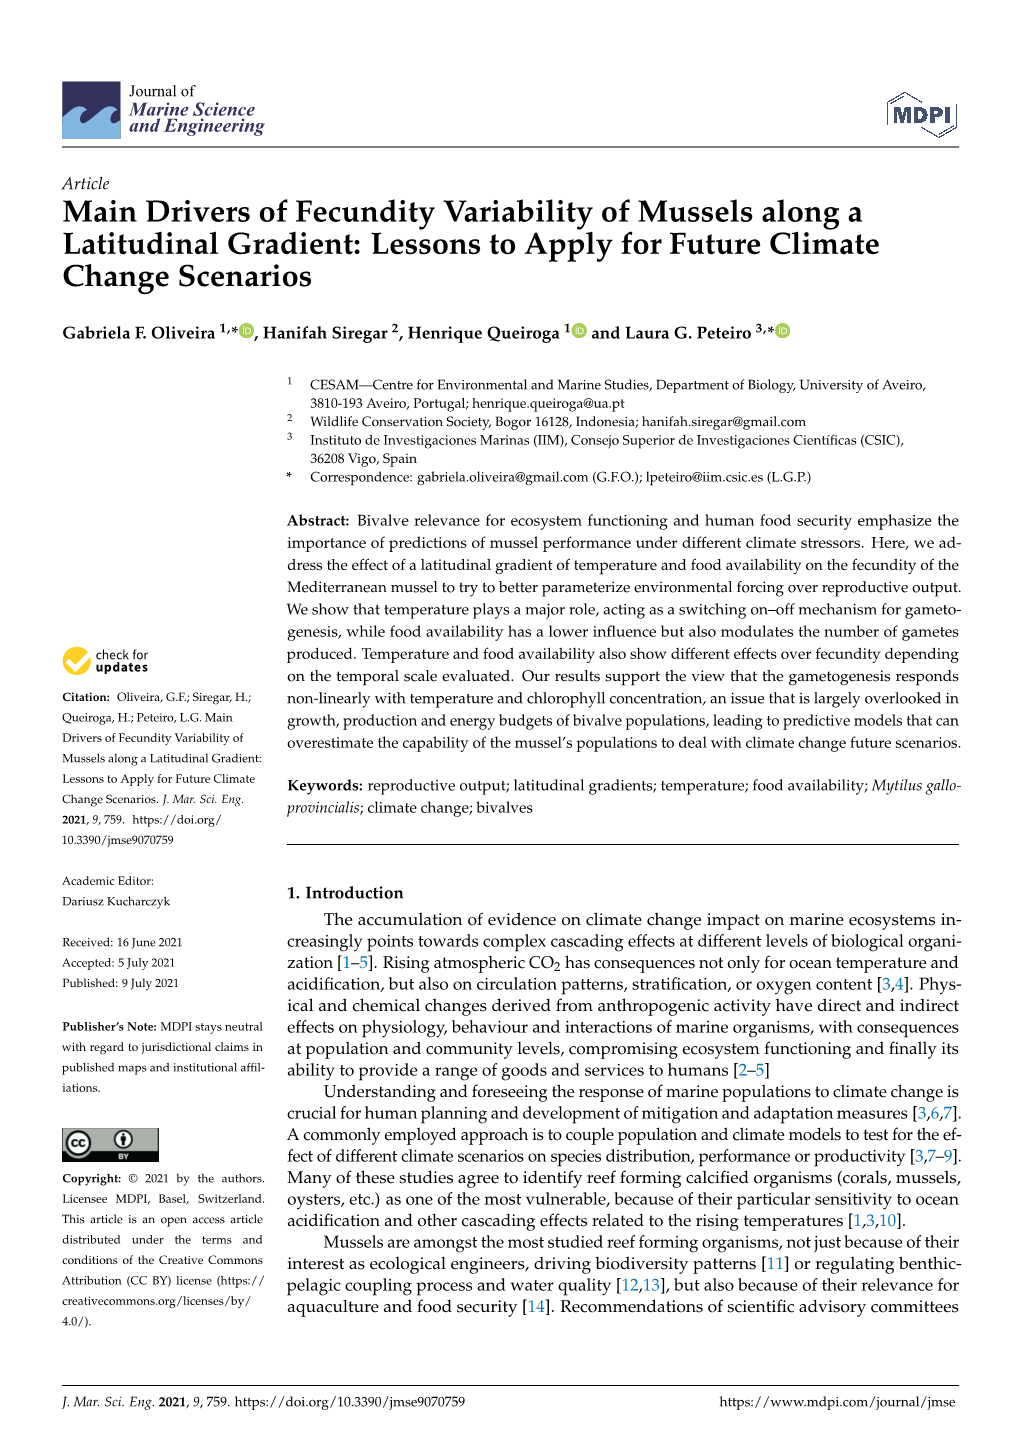 Drivers of Fecundity Variability of Mussels Along a Latitudinal Gradient: Lessons to Apply for Future Climate Change Scenarios